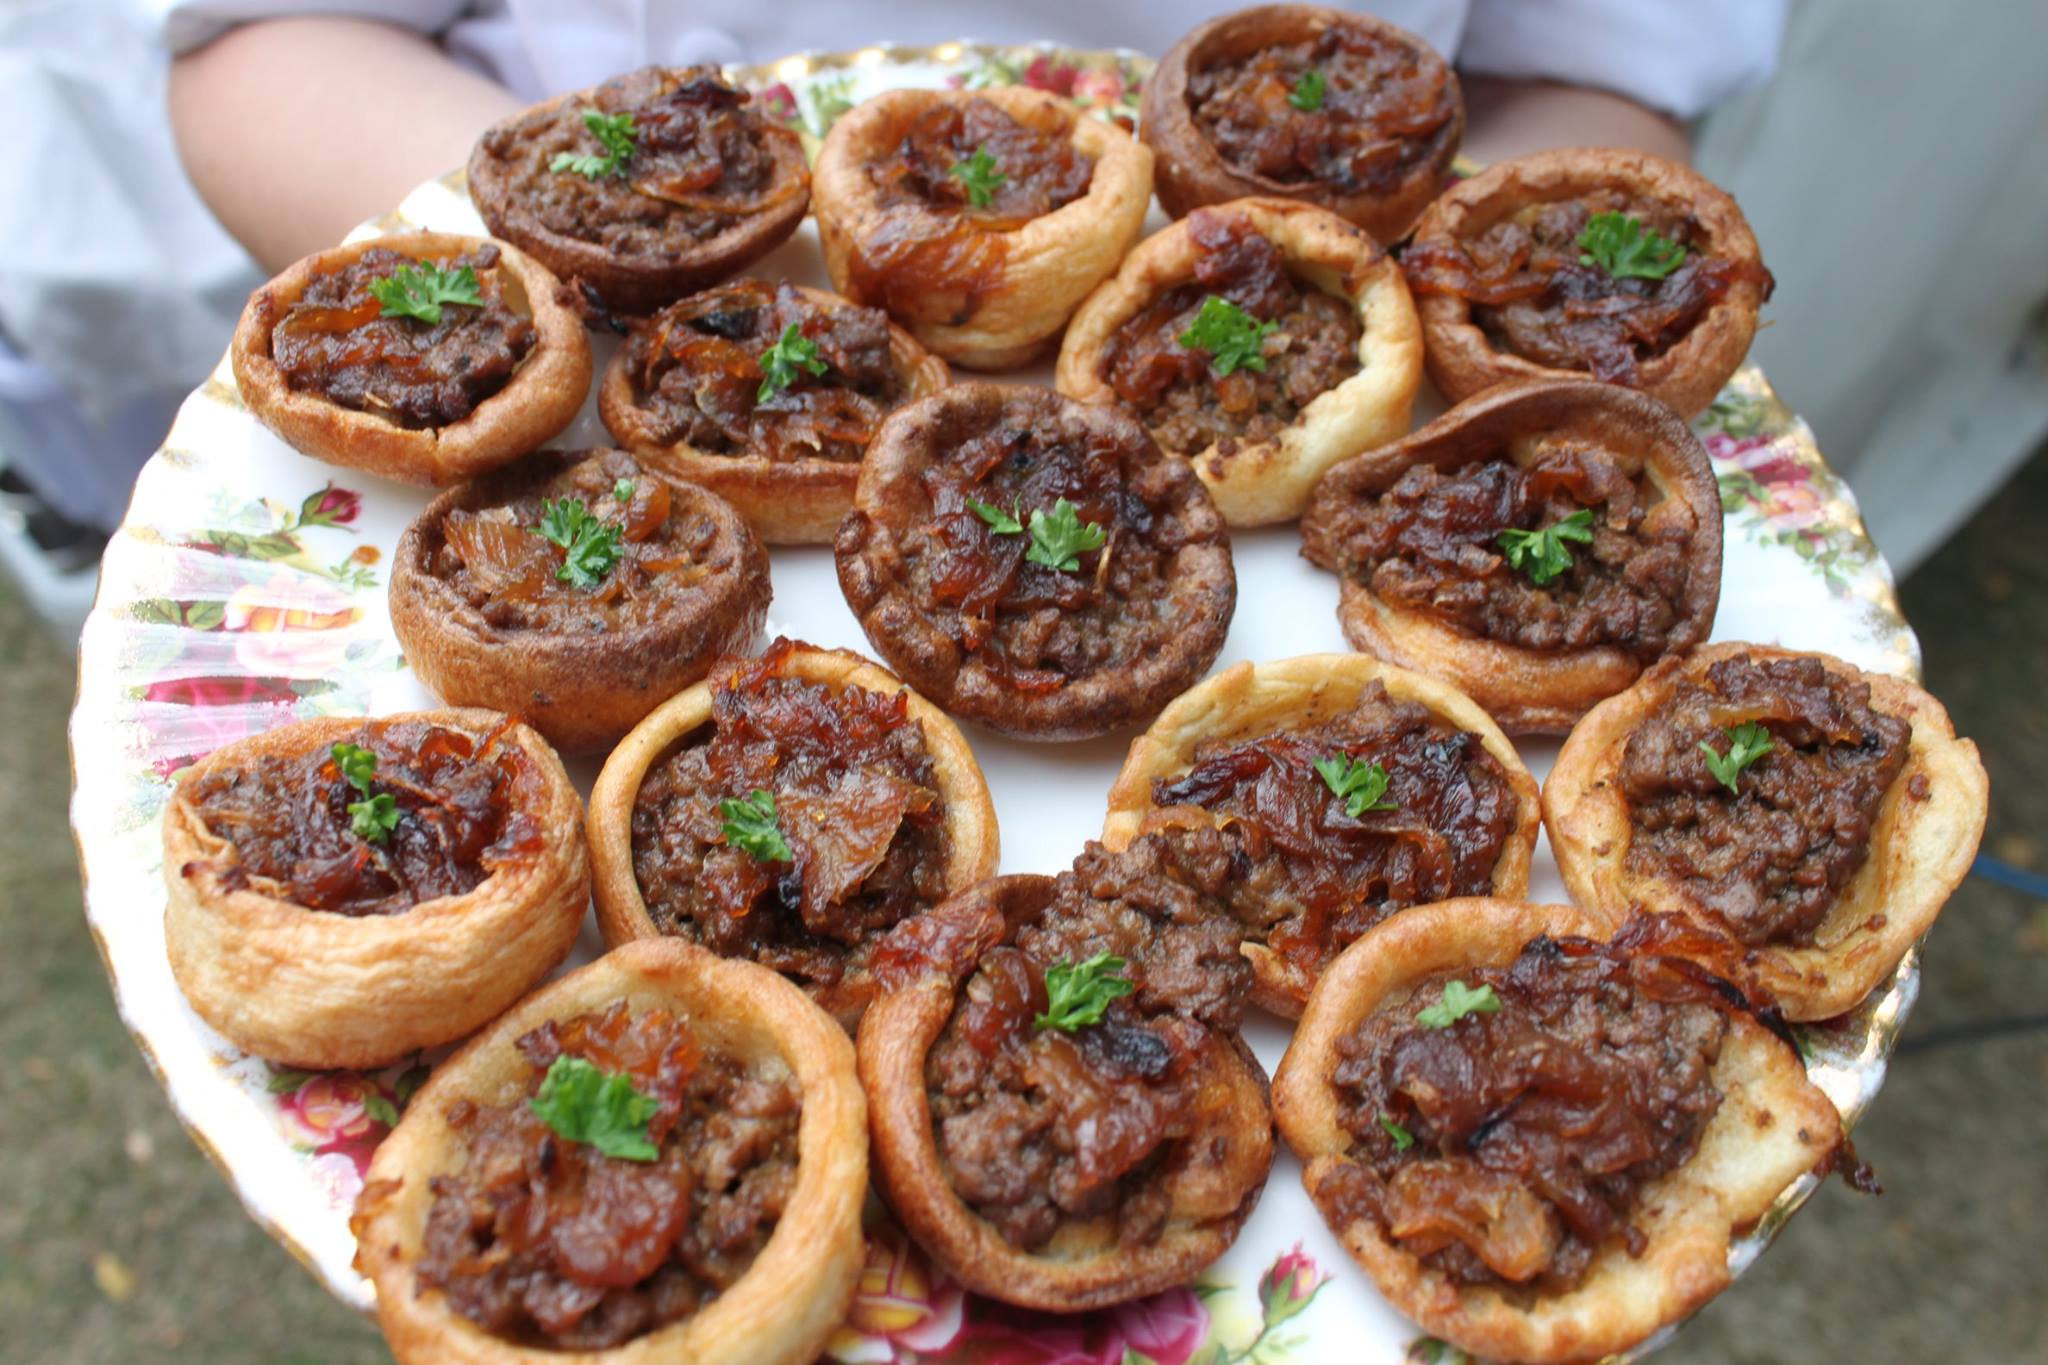 Homemade Yorkshire puddings filled with best minced beef and topped with caramelized onions canapes.